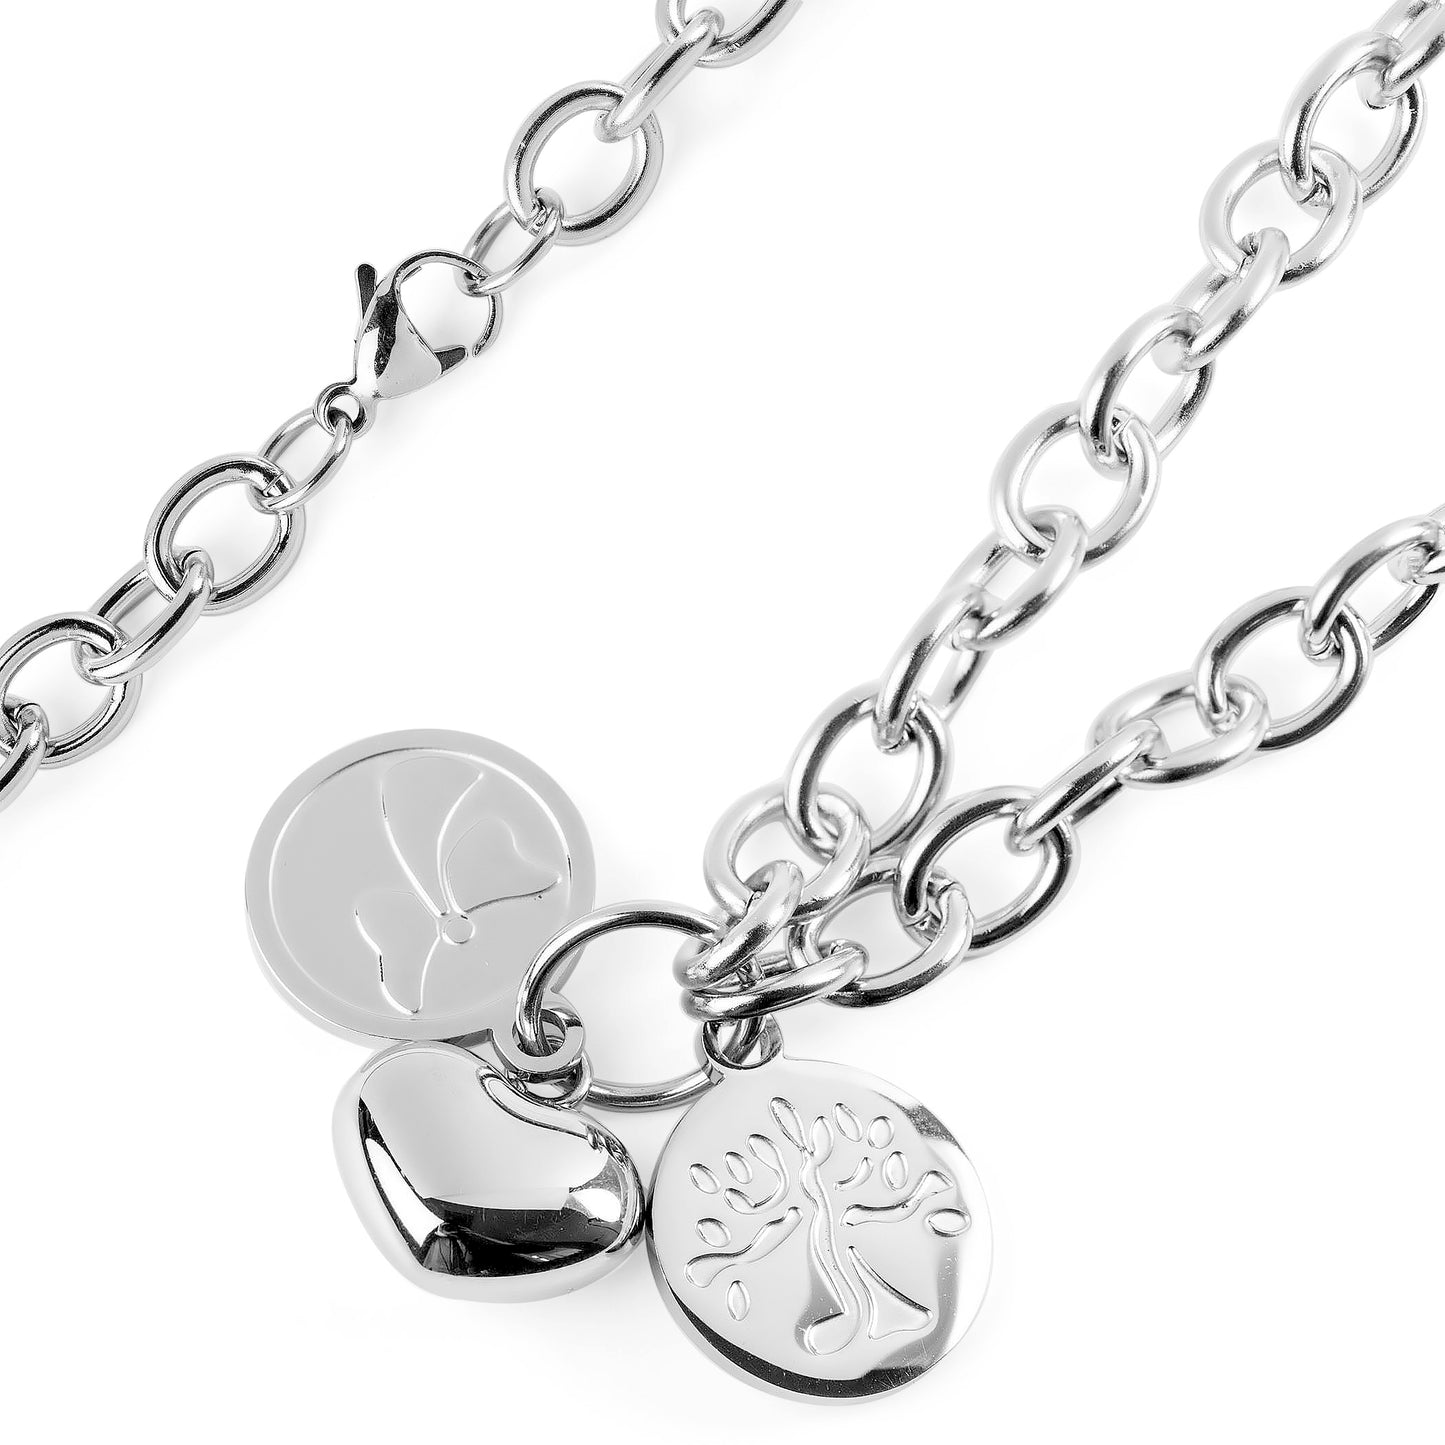 ELYA Blessings, Love and Tree of Life Stainless Steel Necklace - 18"